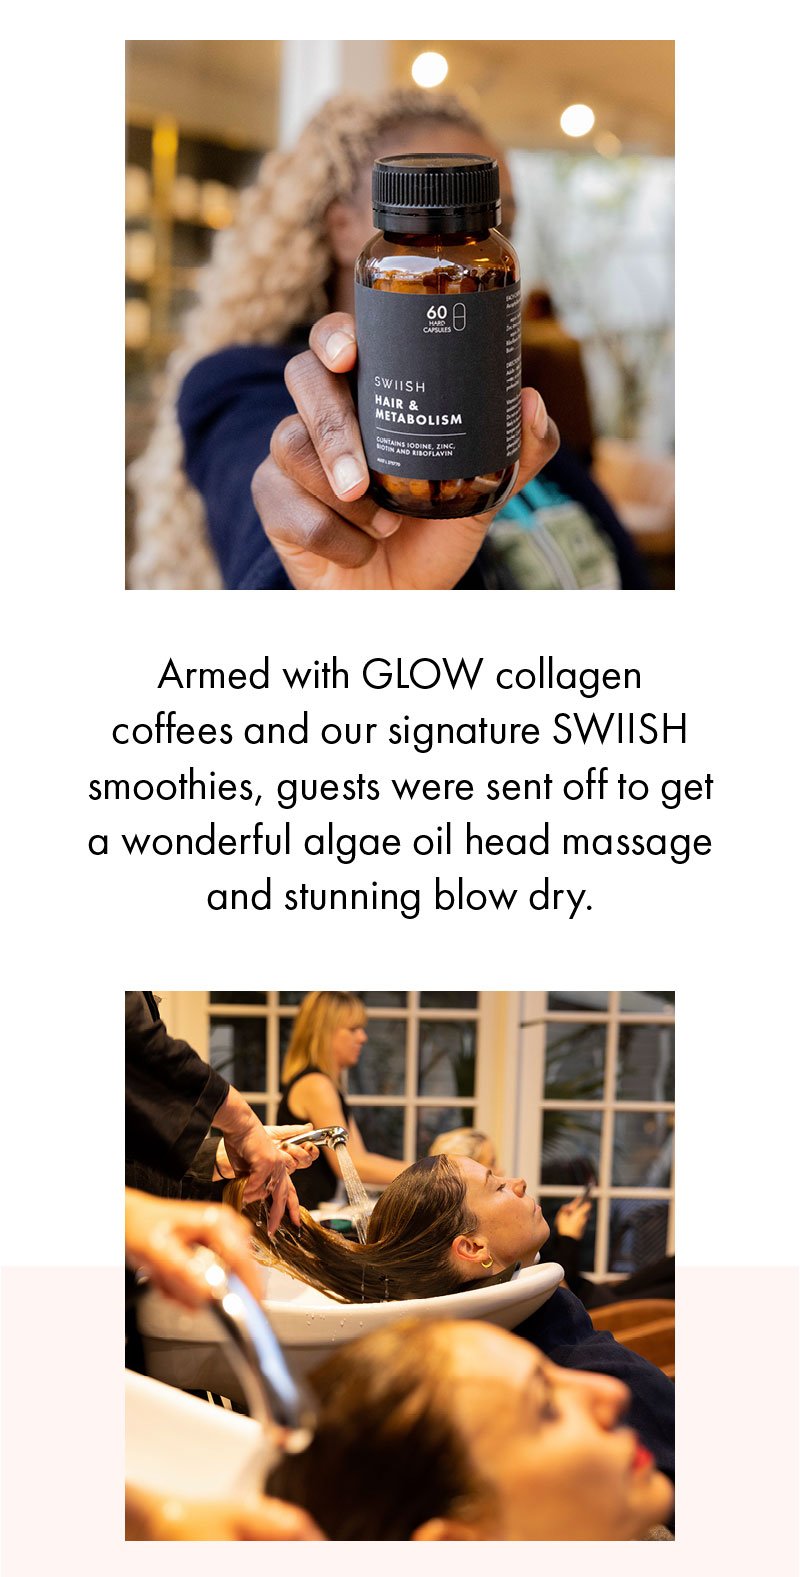 Armed with GLOW collagen coffees and our signature SWIISH smoothies